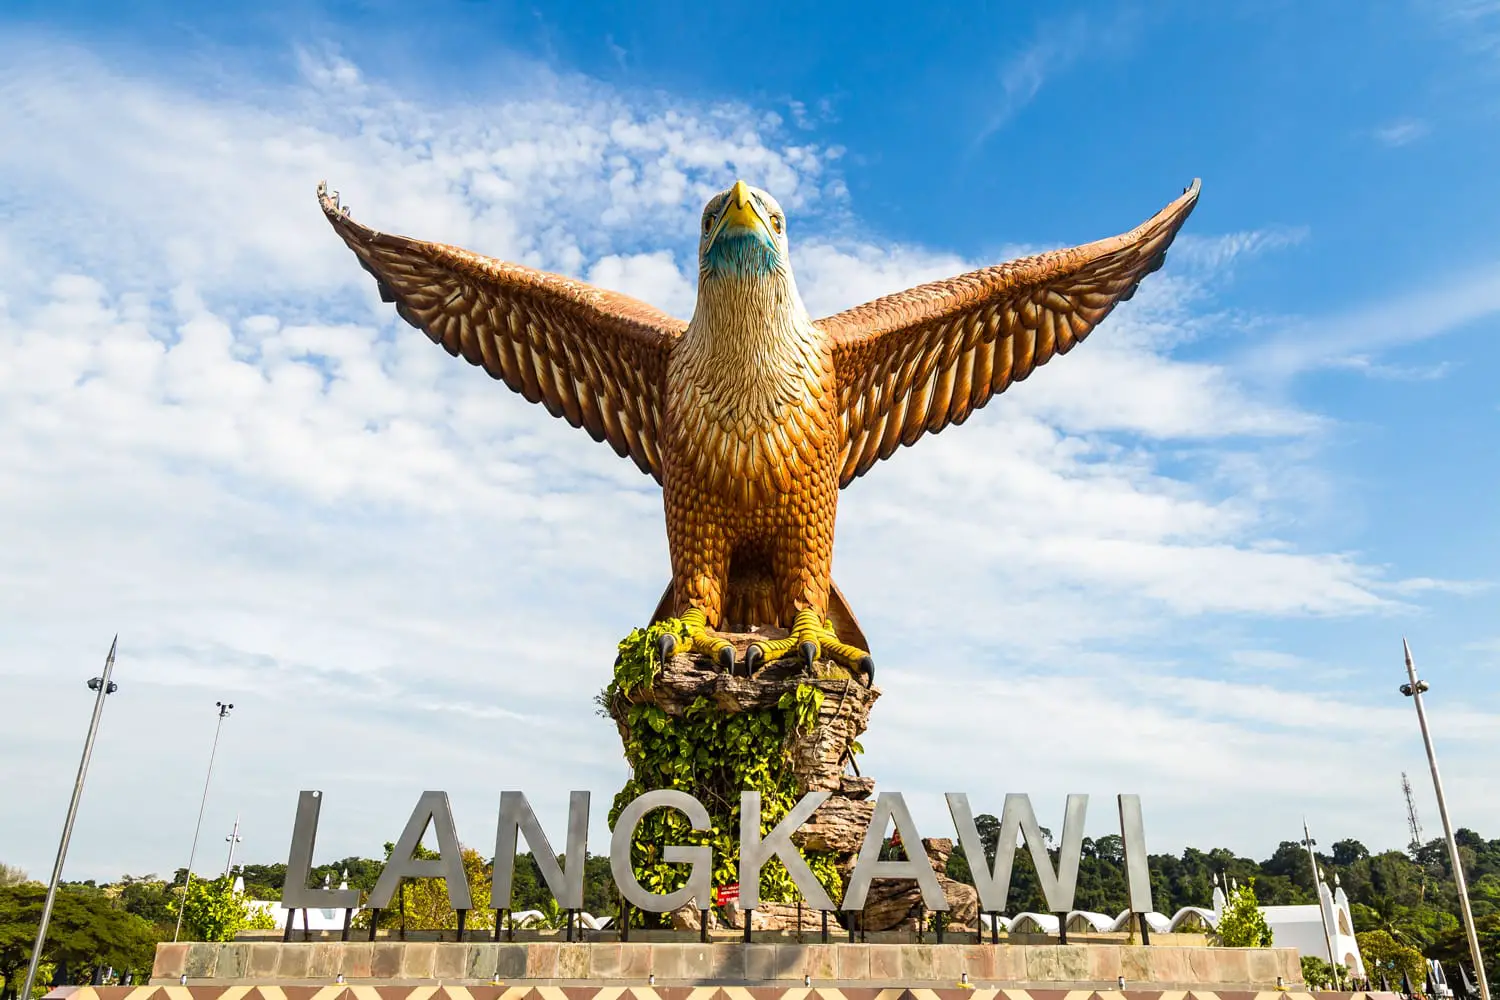 Eagle Square in Langkawi, near the Kuah port, in late afternoon light. This giant Eagle statue is the symbol of Langkawi island, Malaysia